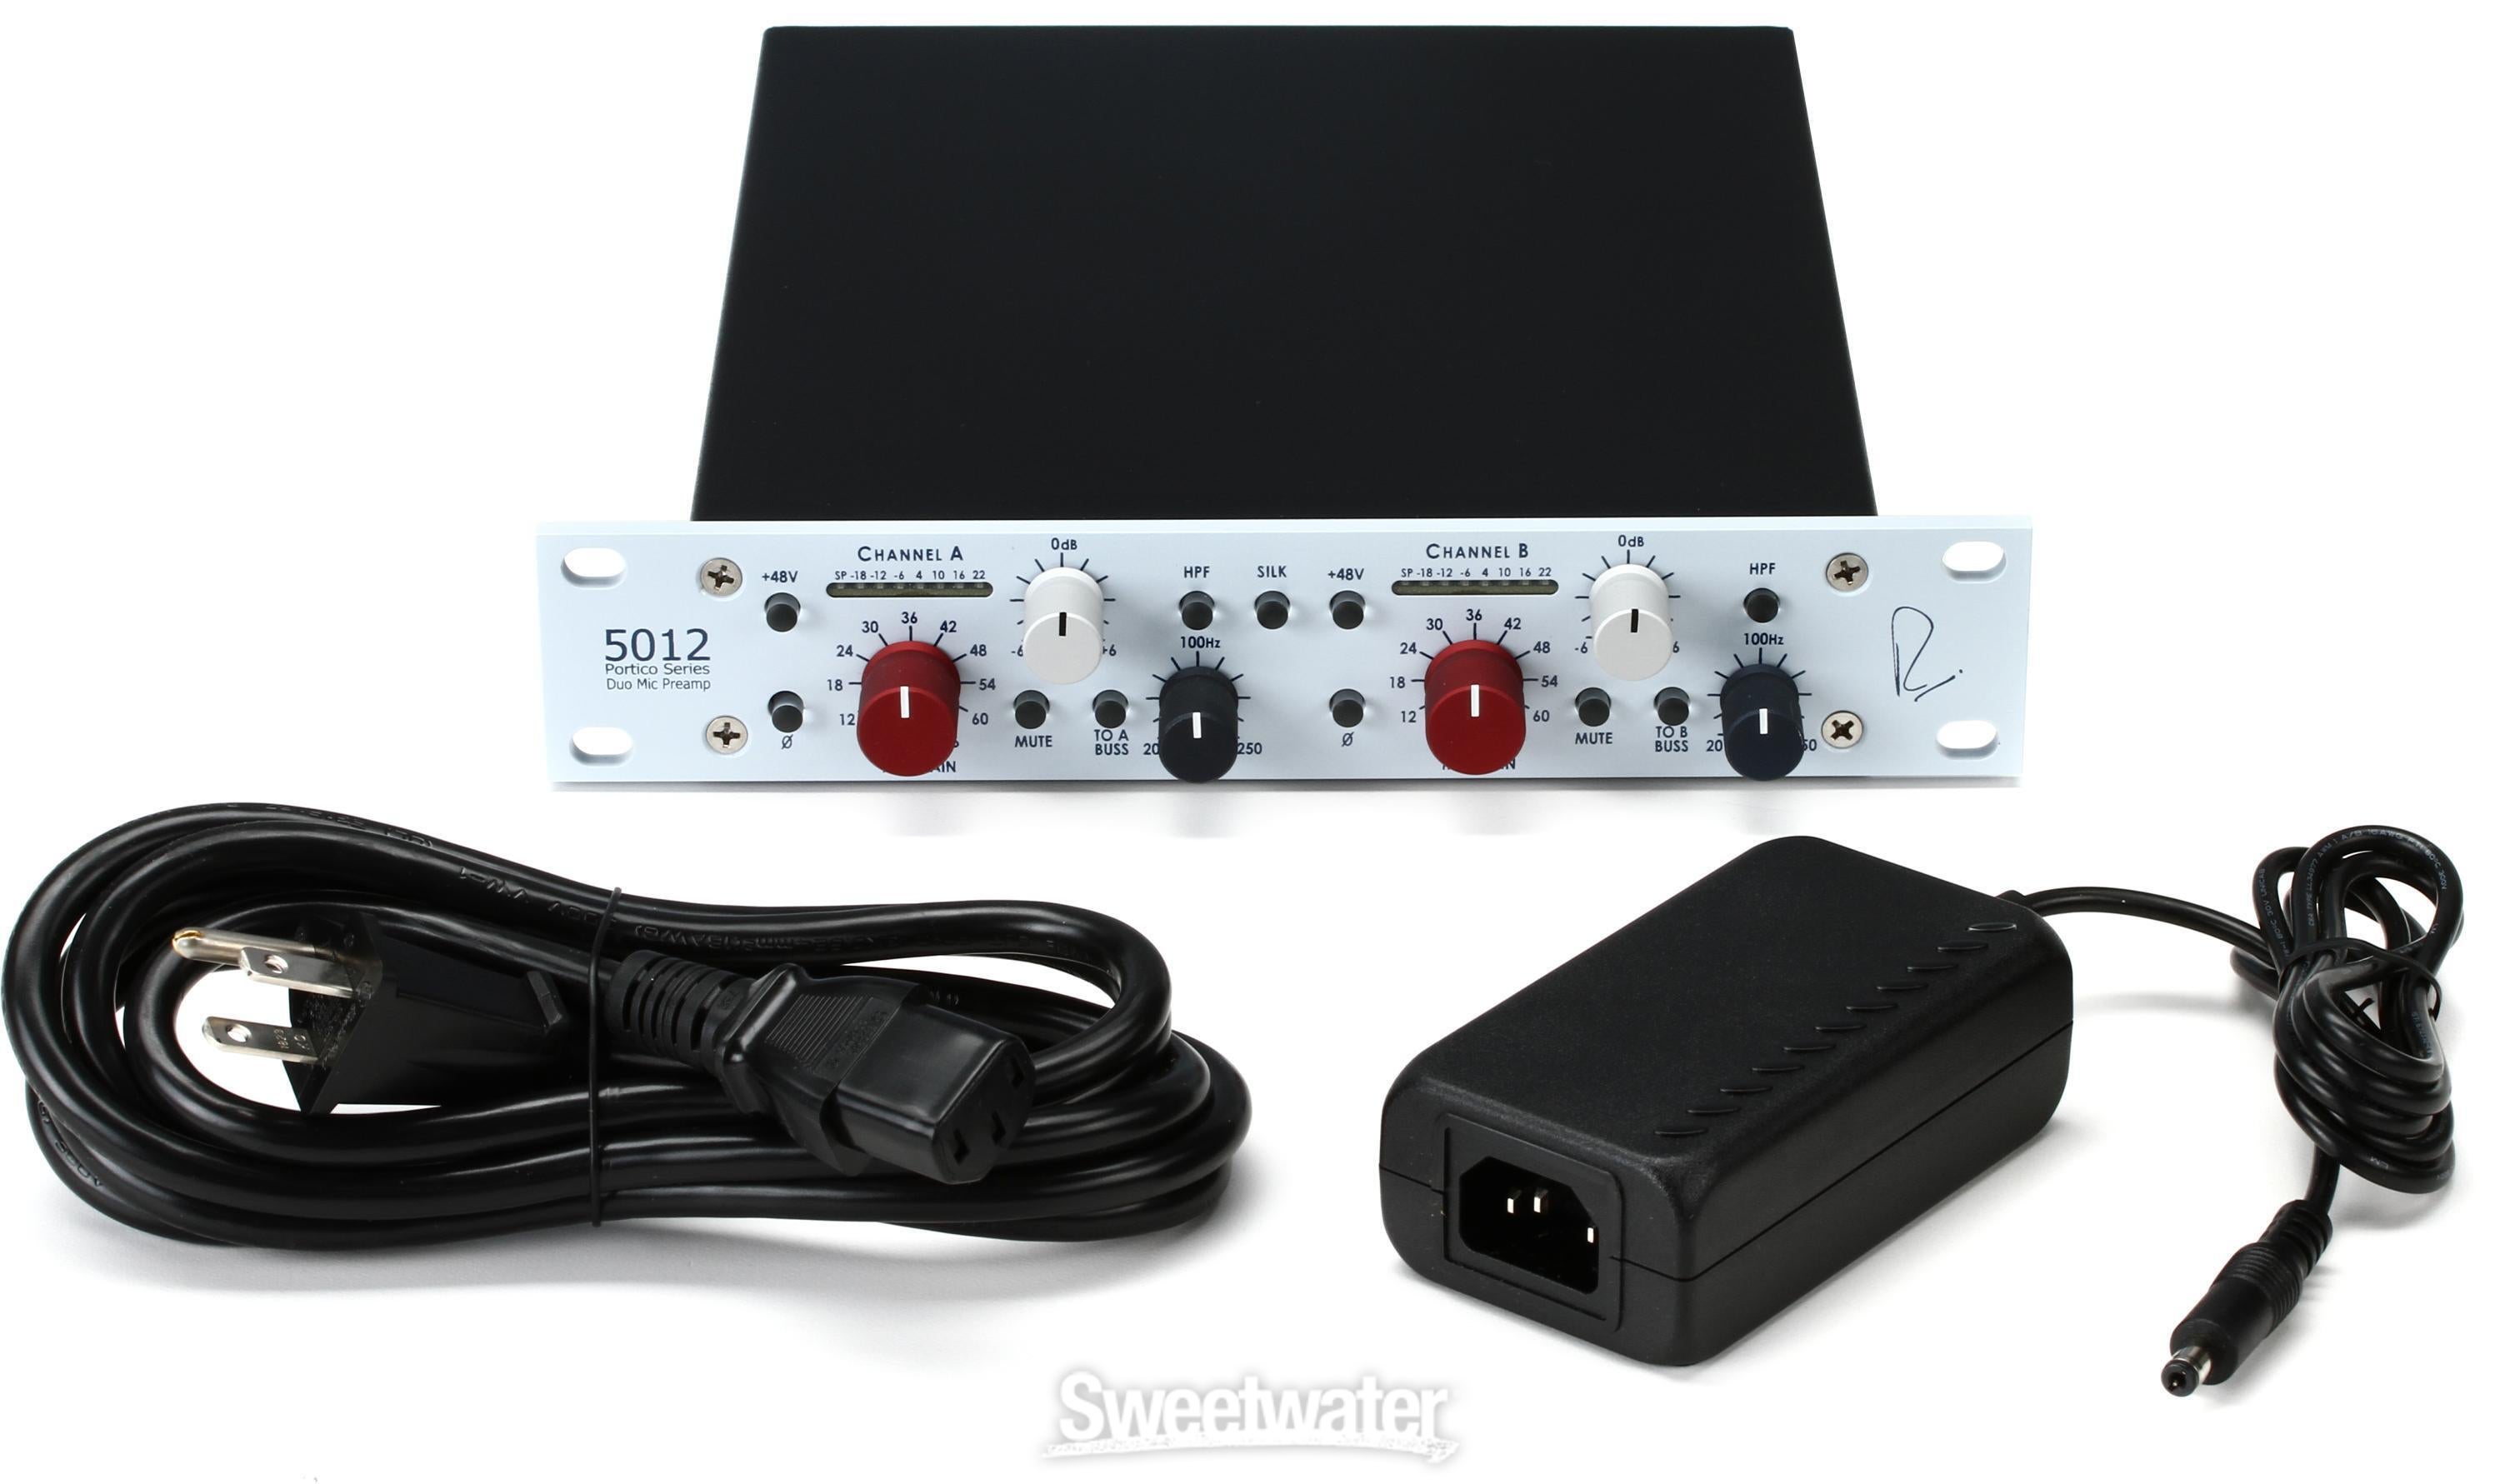 Rupert Neve Designs Portico 5012 2-channel Microphone Preamp Reviews |  Sweetwater